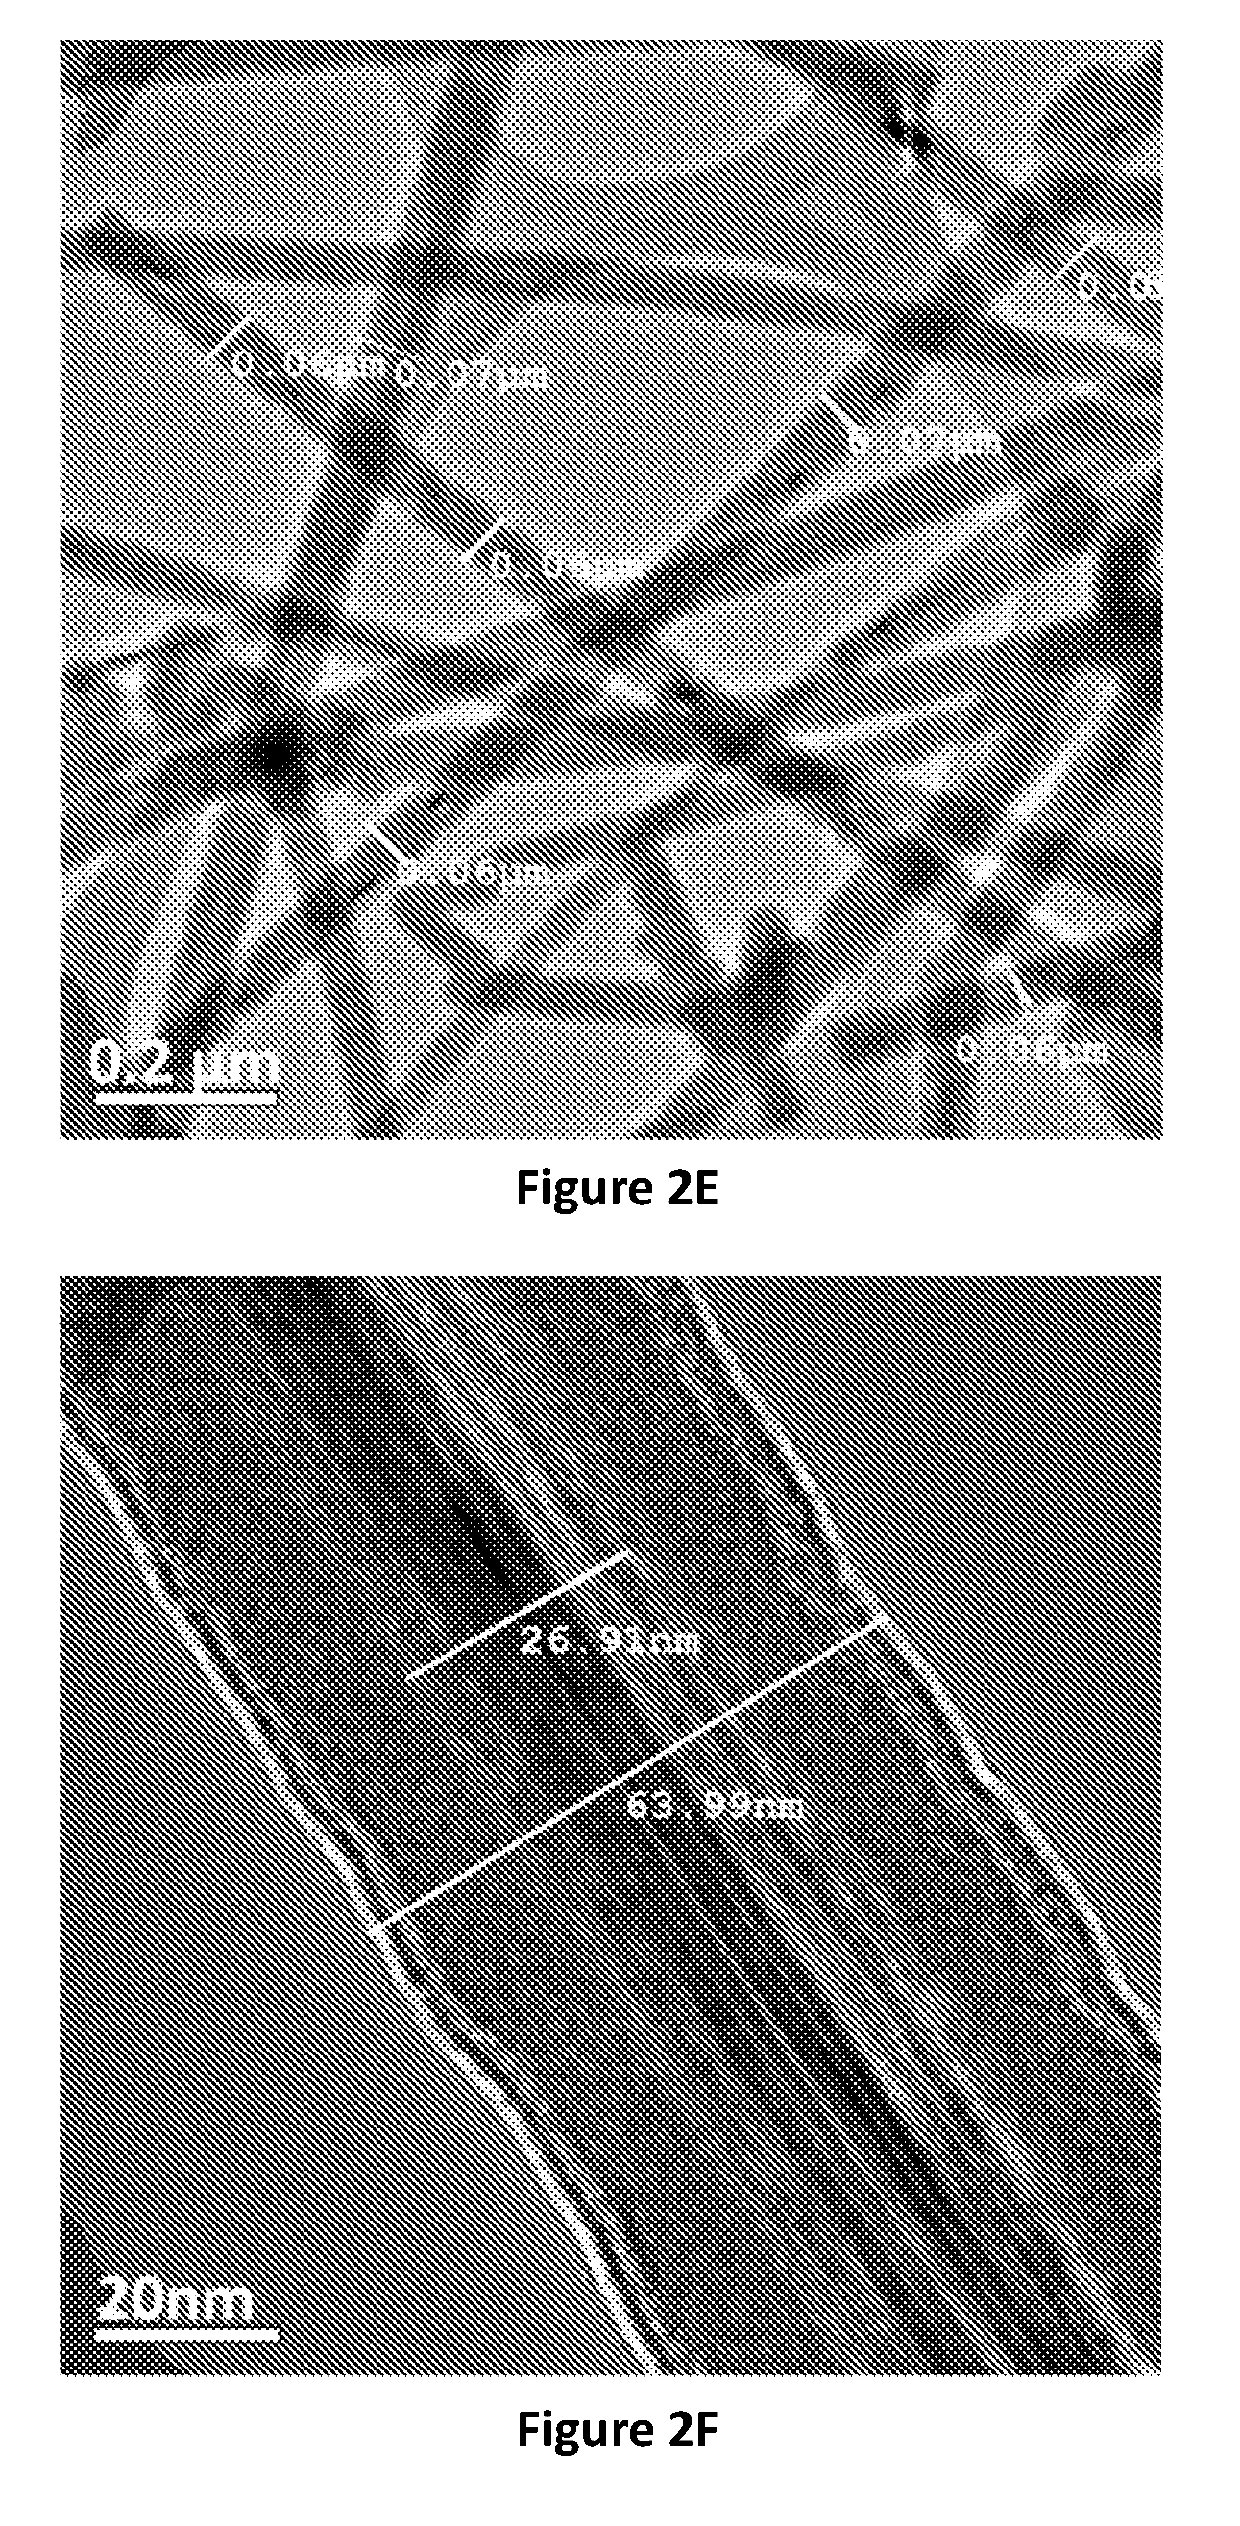 High-capacity silicon nanowire based anode for lithium-ion batteries